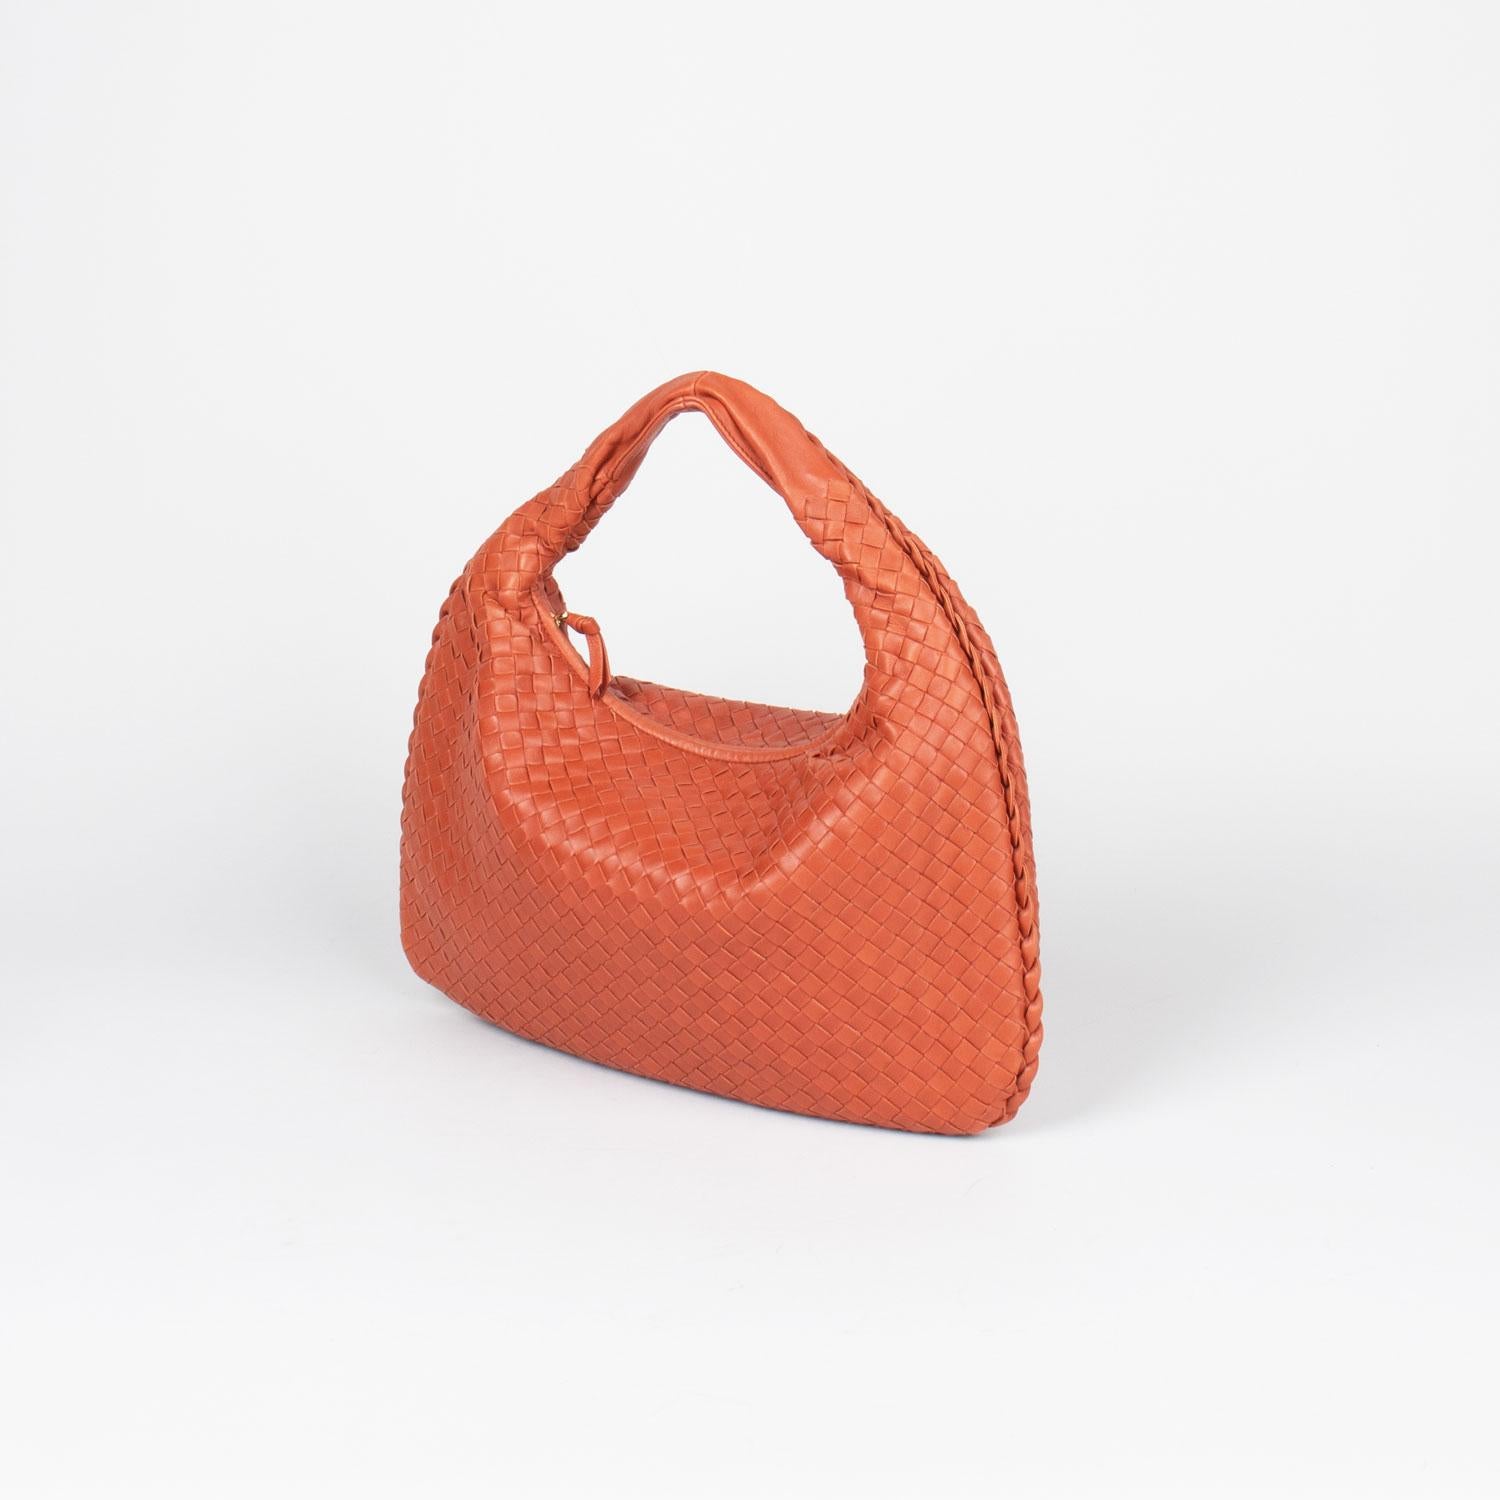 Orange Intrecciato leather Bottega Veneta Medium Hobo bag with

- Gold-tone hardware
- Single flat shoulder strap
- Tan suede lining
- Dual pockets at interior walls; one with zip closure and zip closure at top

Overall Preloved Condition: Very